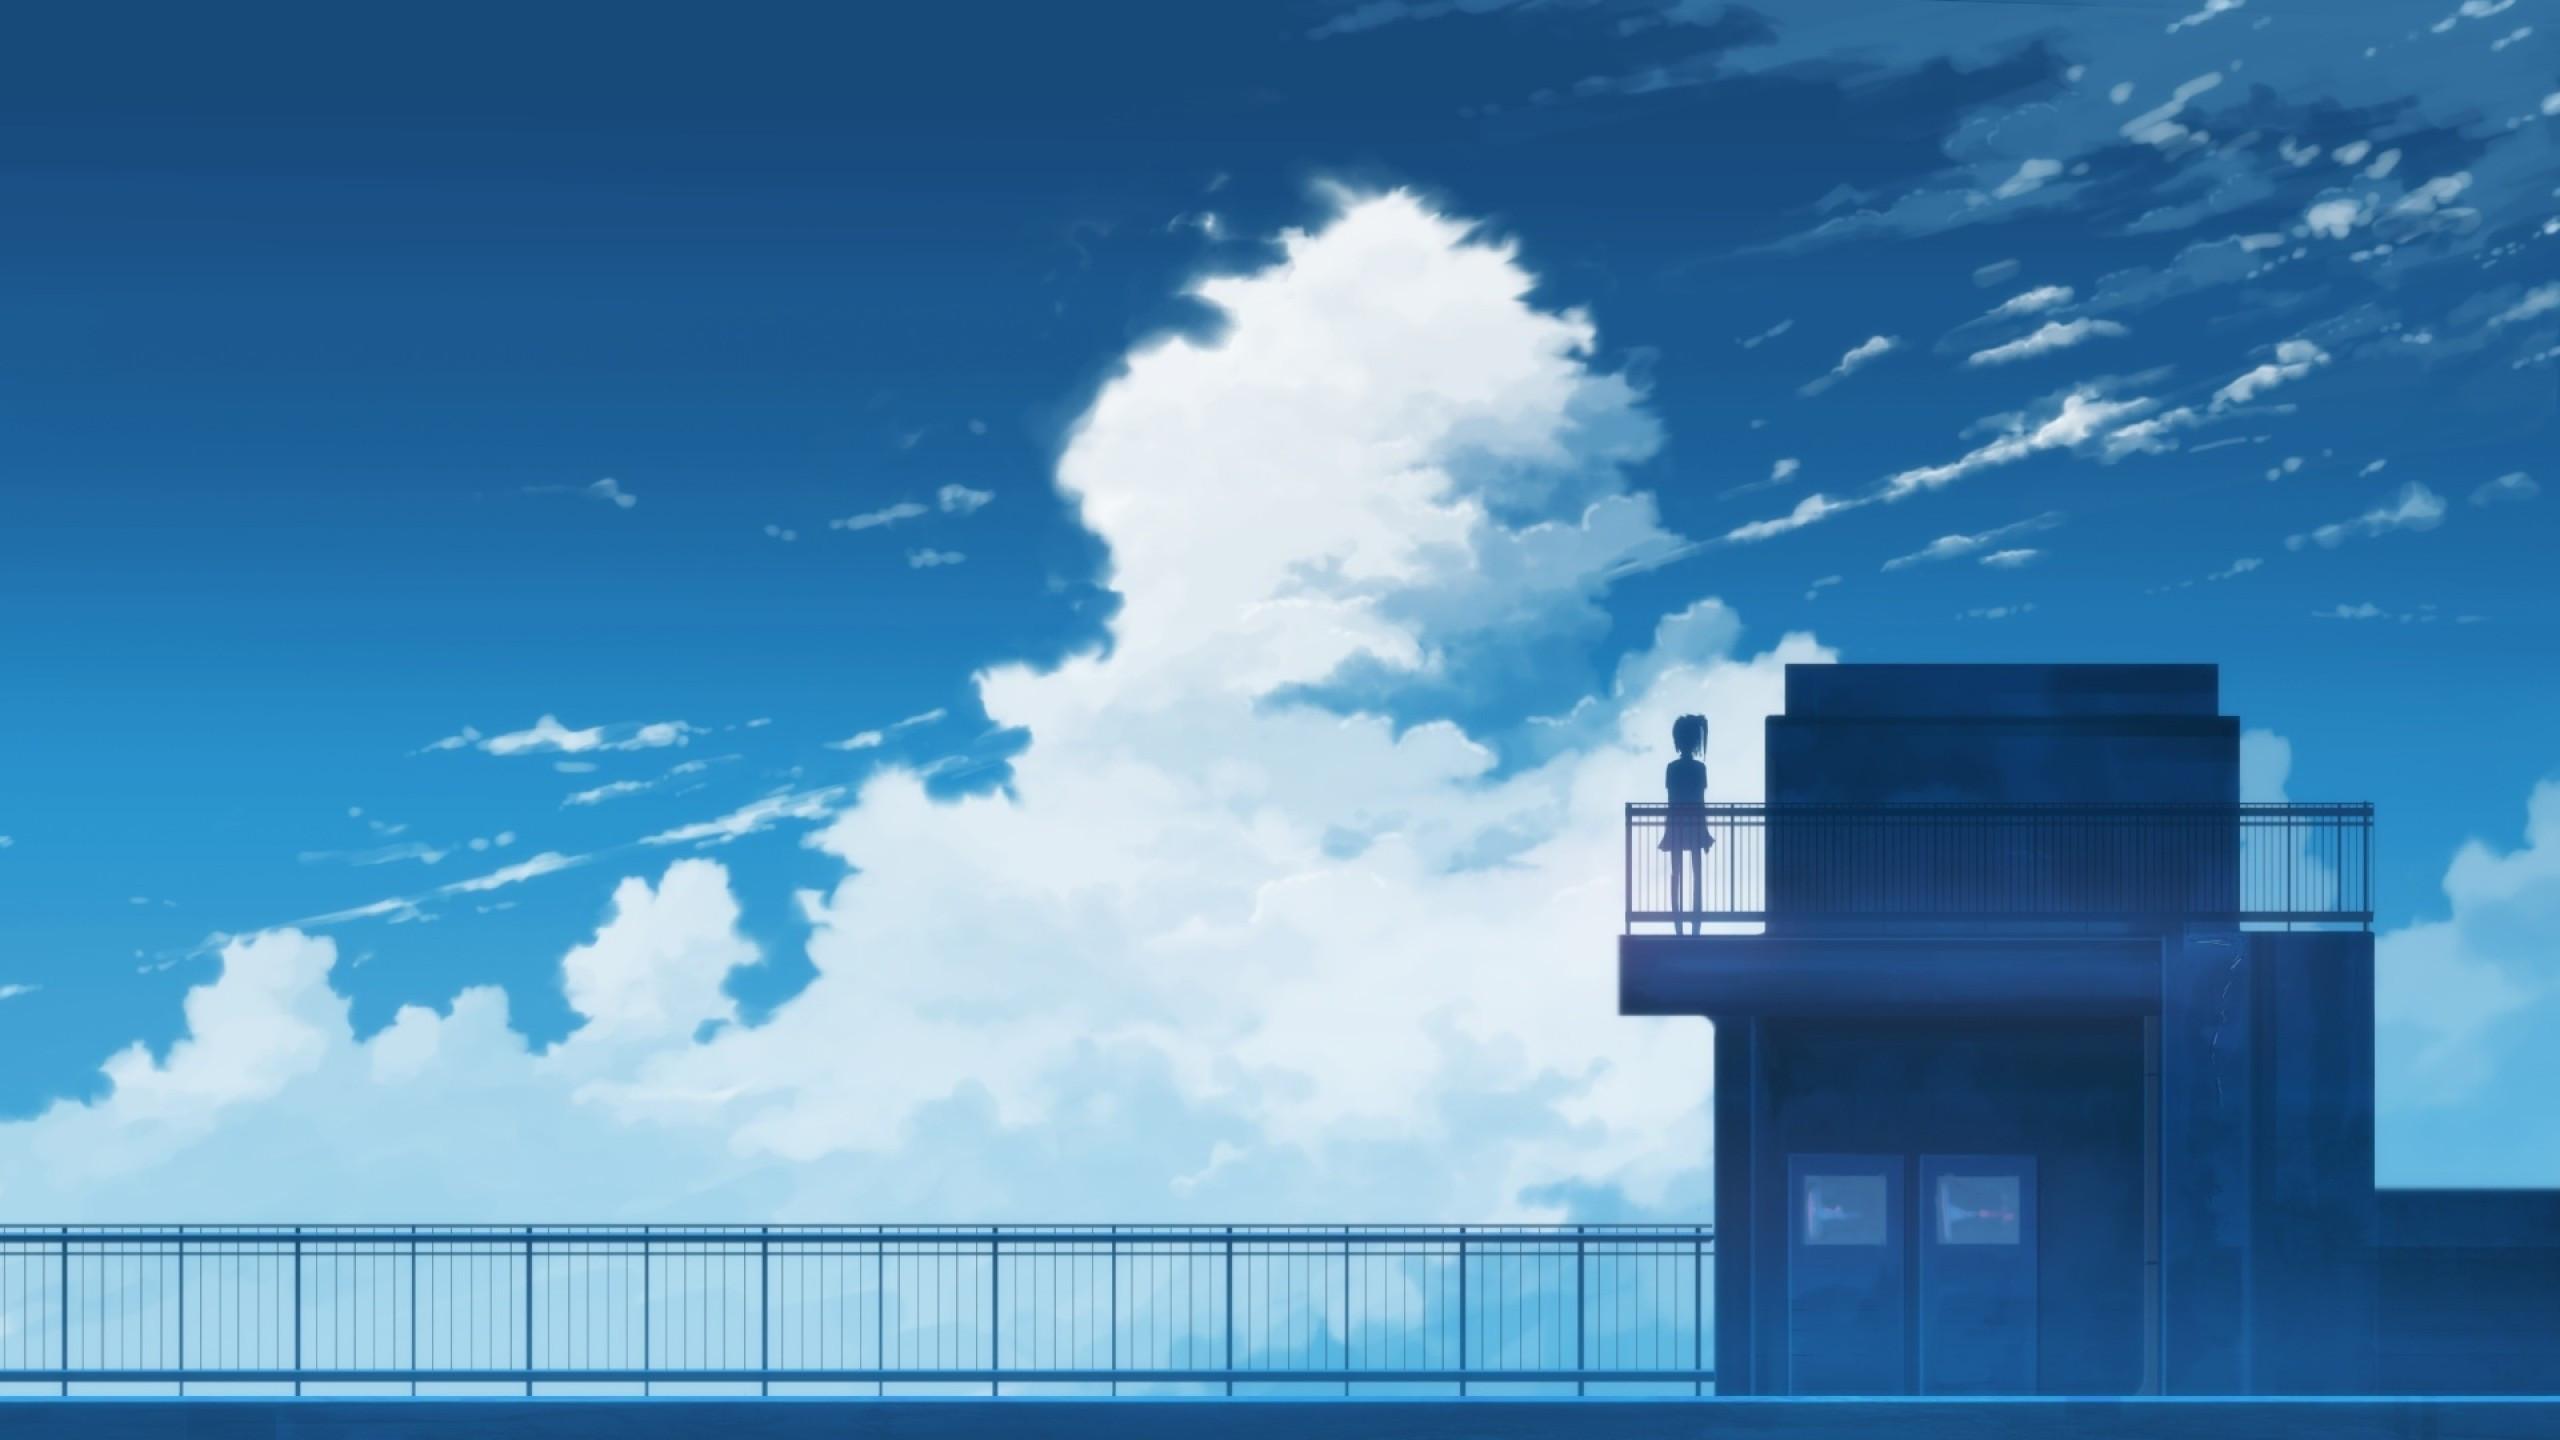 tropes - Why there are many scenes in anime that take place on the roof? -  Anime & Manga Stack Exchange